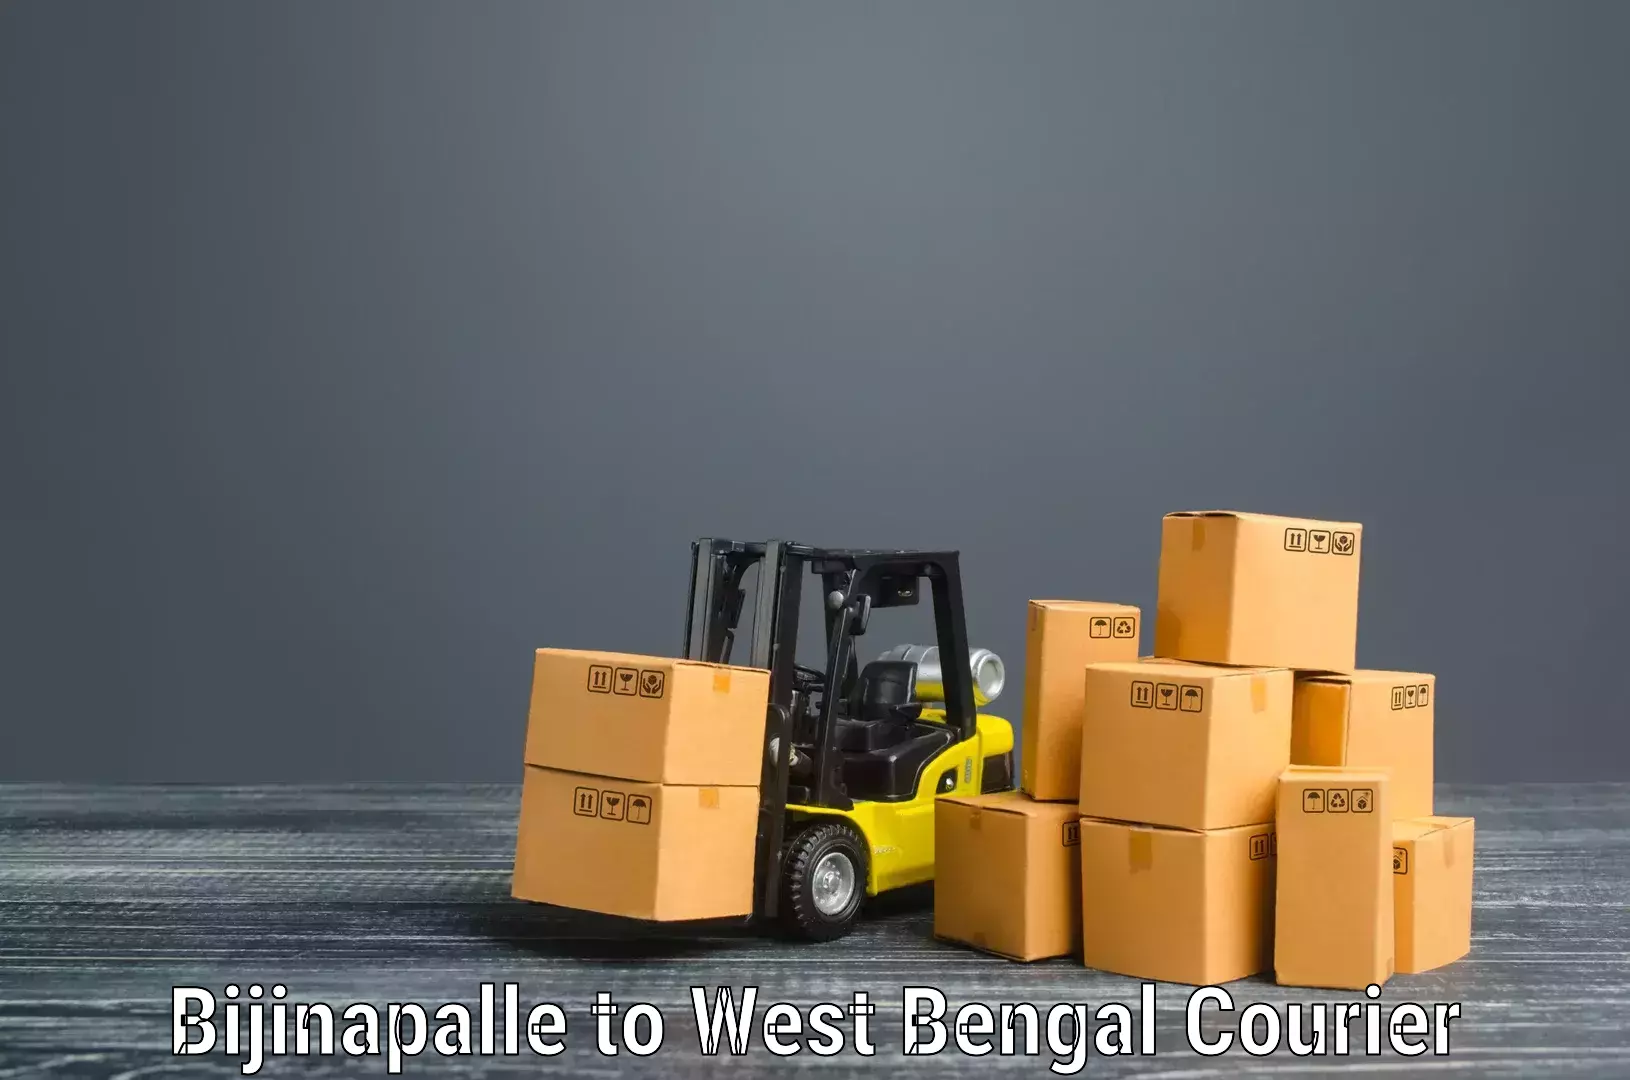 Home goods moving company Bijinapalle to Bagdogra